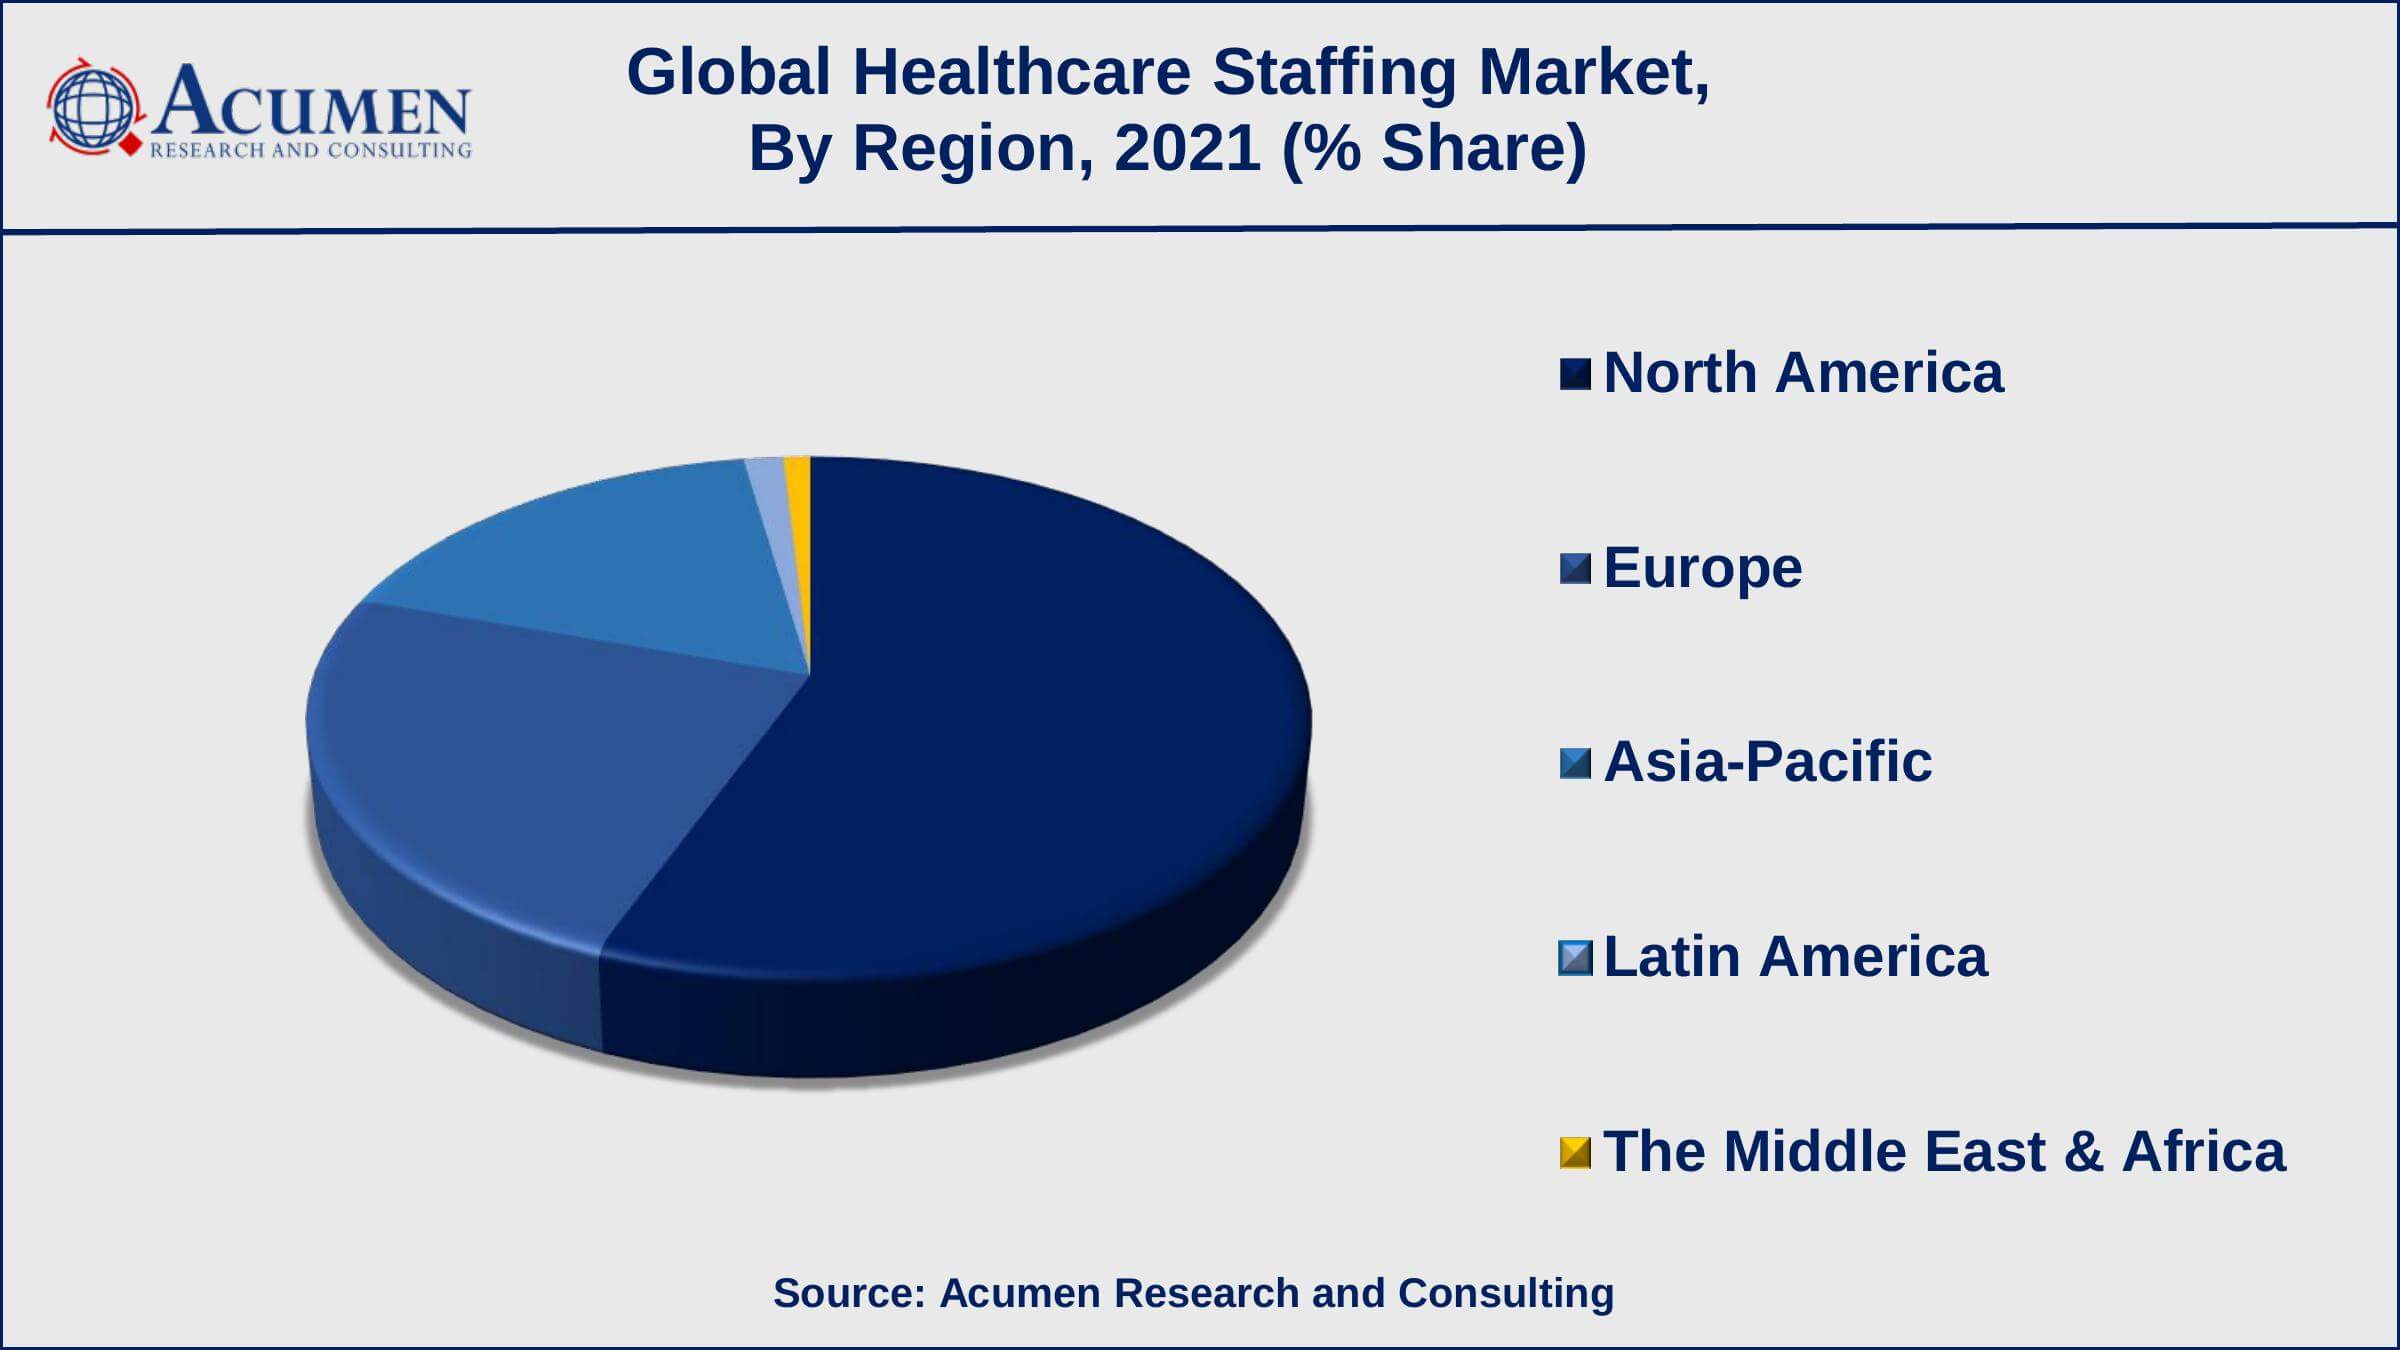 Growing number of staffing outsourcing is a popular healthcare staffing market trend that fuels the industry demand